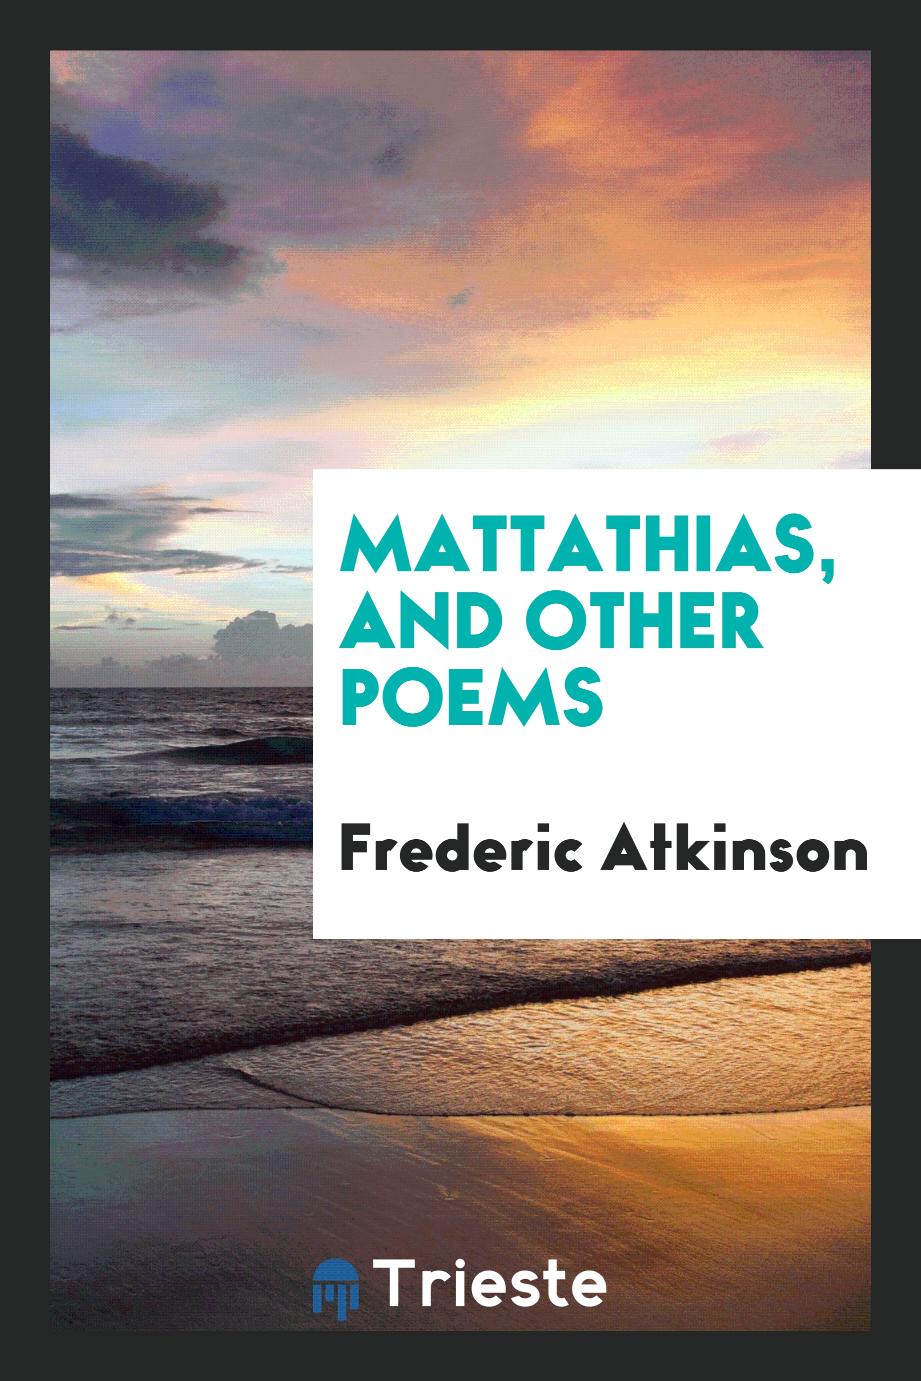 Mattathias, and other poems